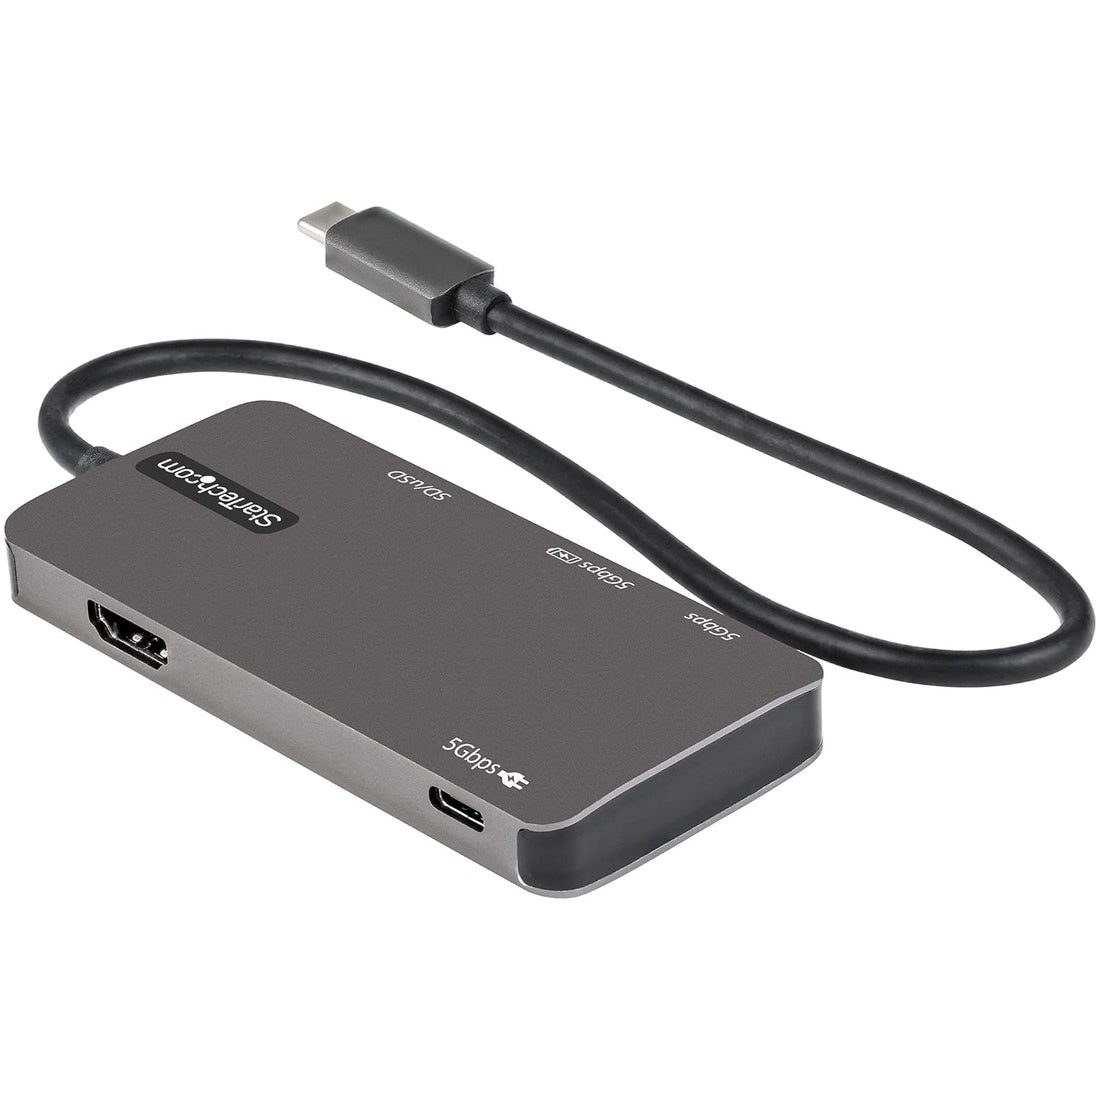 StarTech.com USB C Multiport Adapter - USB-C to 4K HDMI, 100W Power Delivery Pass-Through, SD/MicroSD Slot, 3-Port USB 3.0 Hub - USB Type-C Mini Dock - 12" (30cm) Long Attached Cable (DKT30CHSDPD)